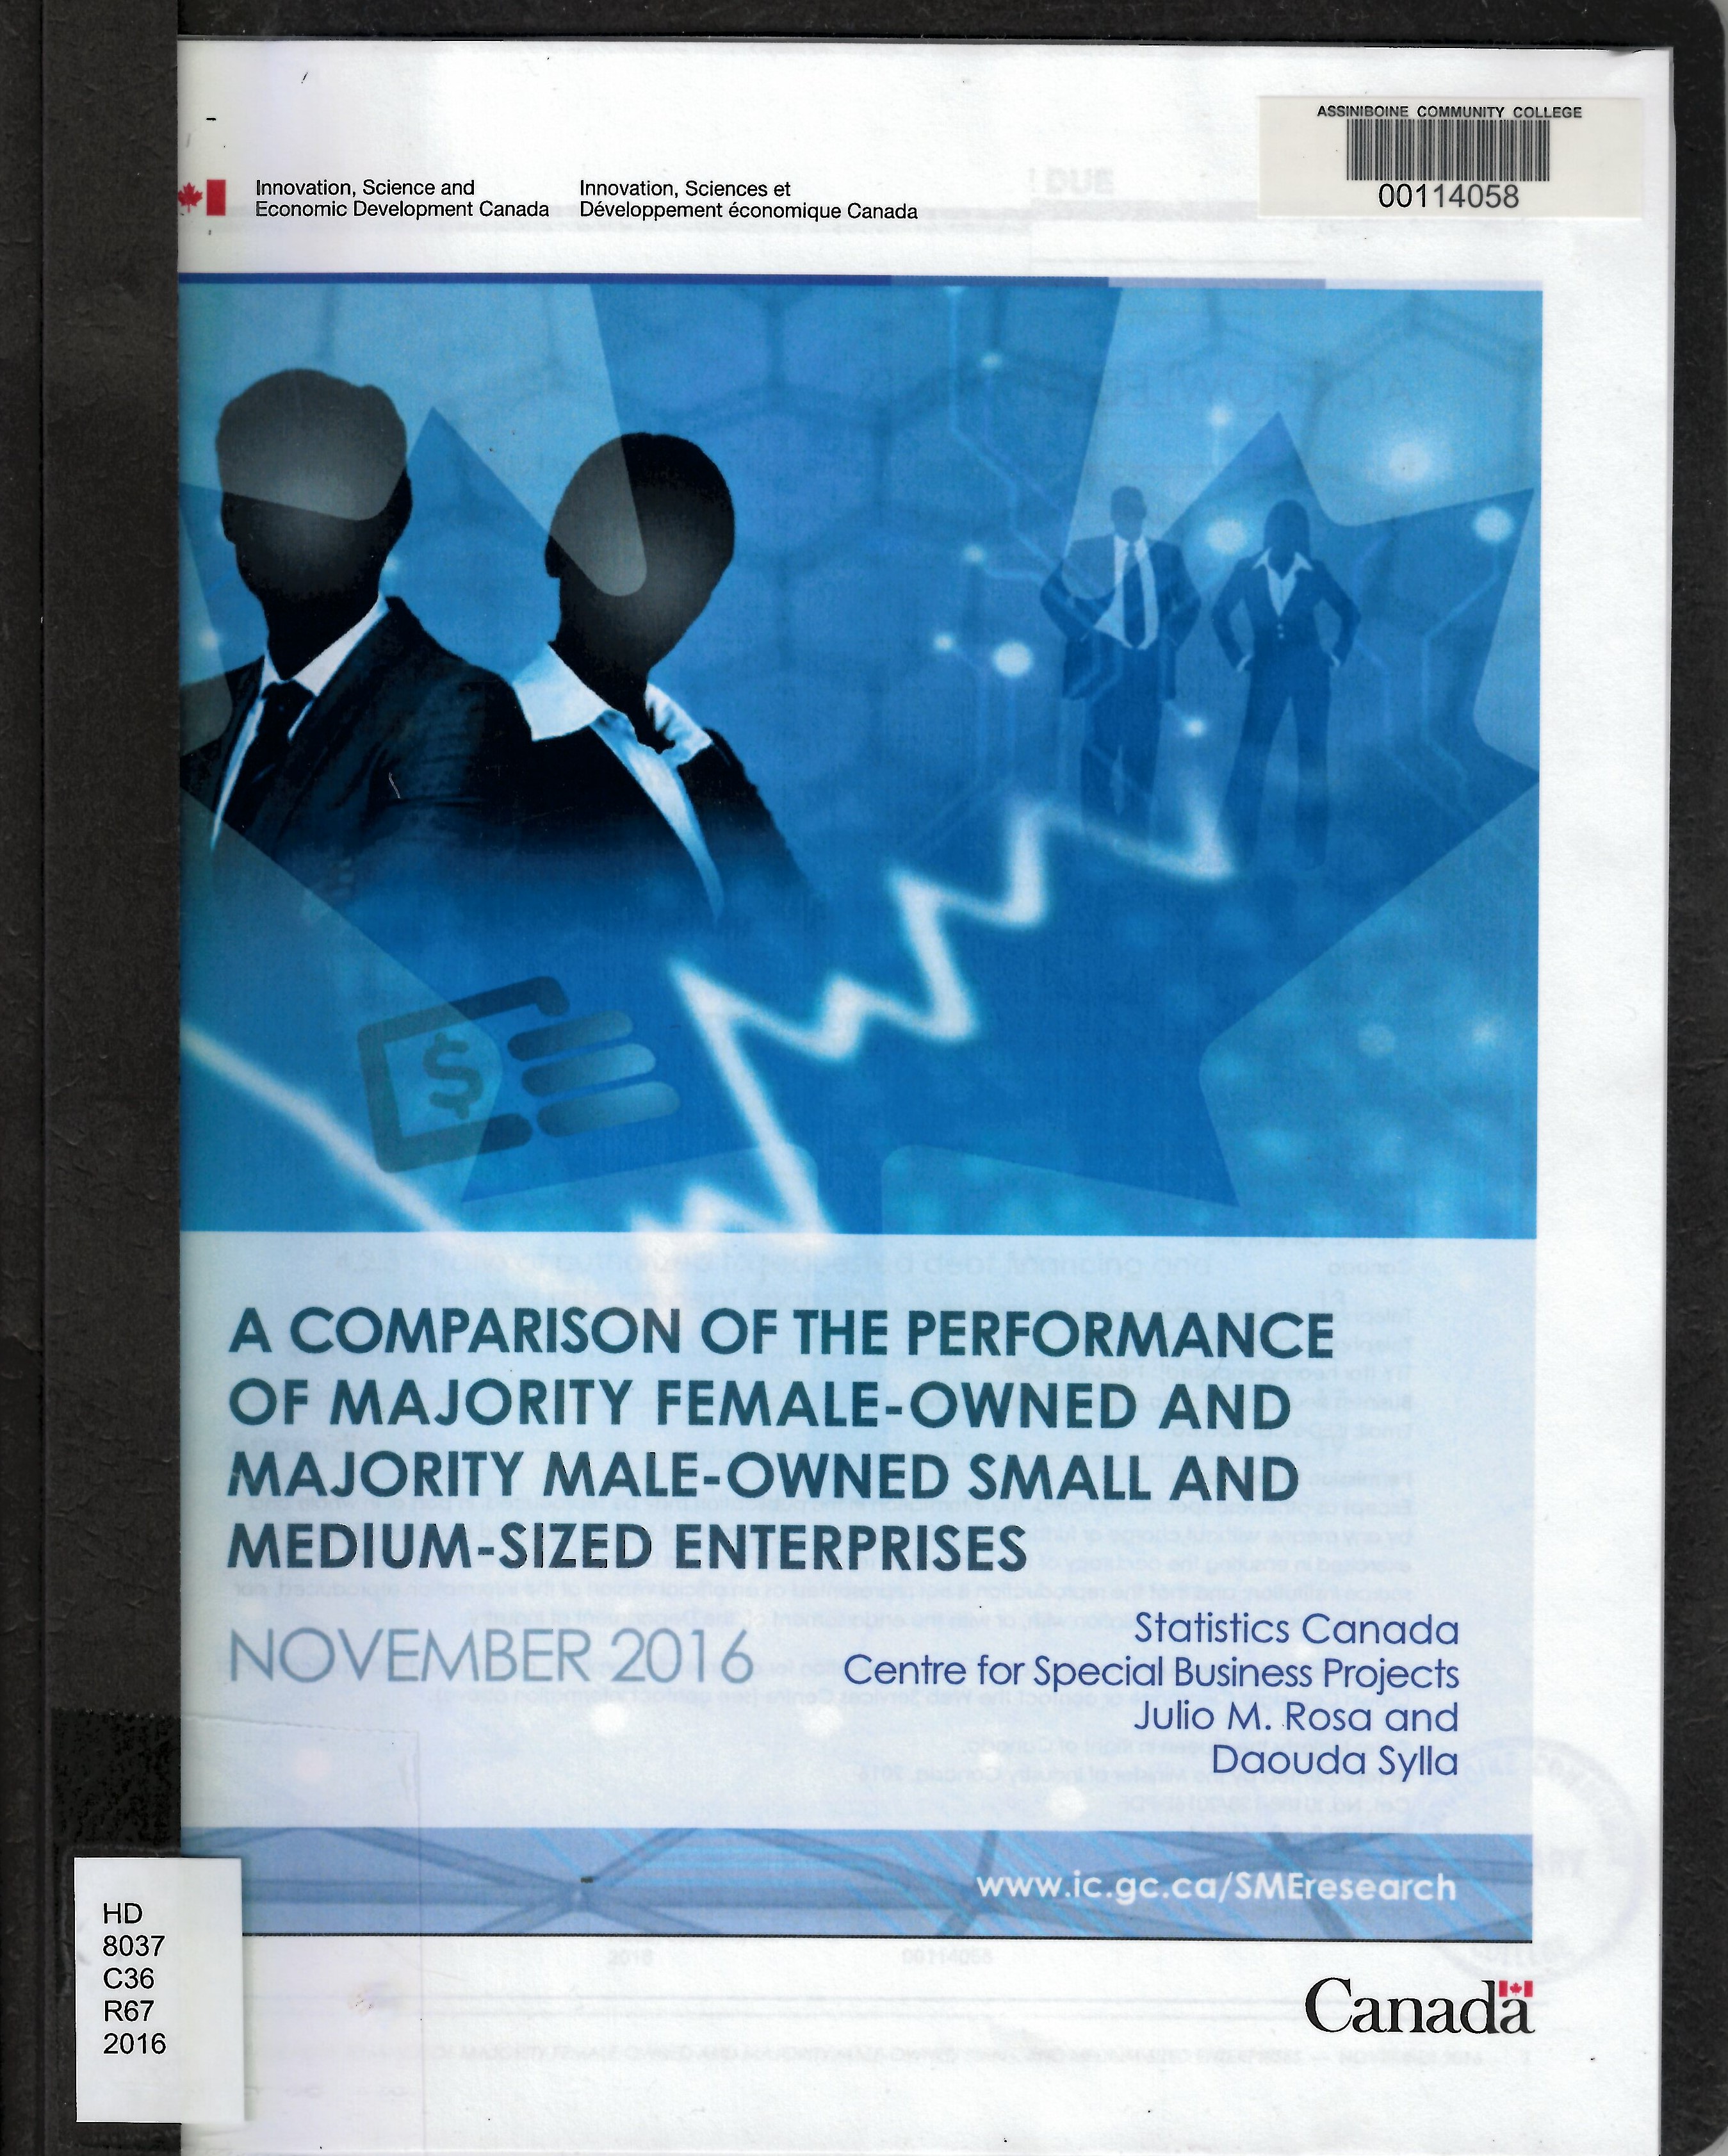 A comparison of the performance of majority female-owned and majority male-owned small and meedium-sized enterprises